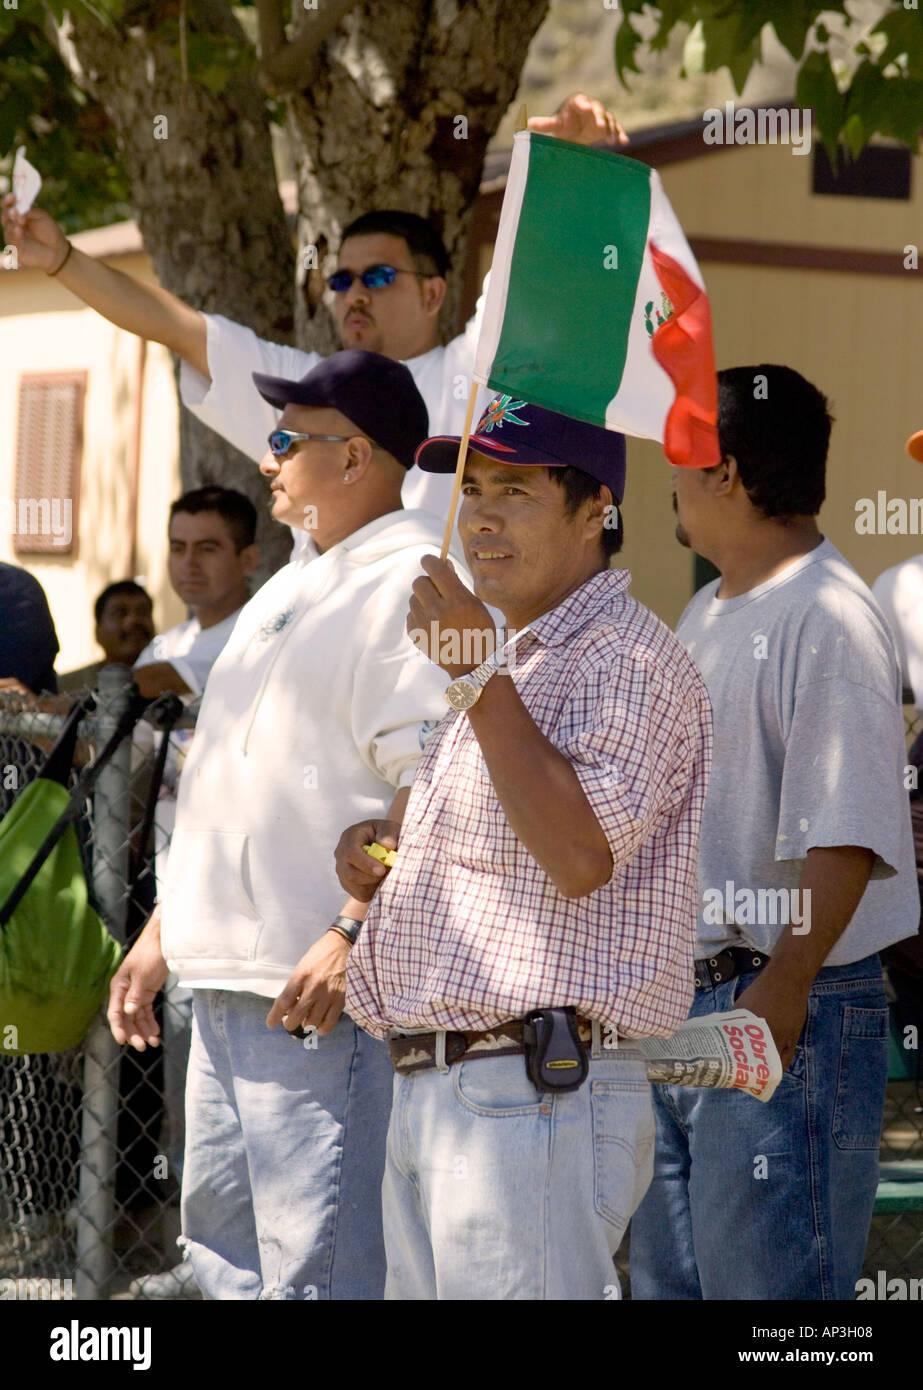 Day laborer waves a small Mexican flag at pro-laborer demonstration in Laguna Beach, CA. Stock Photo